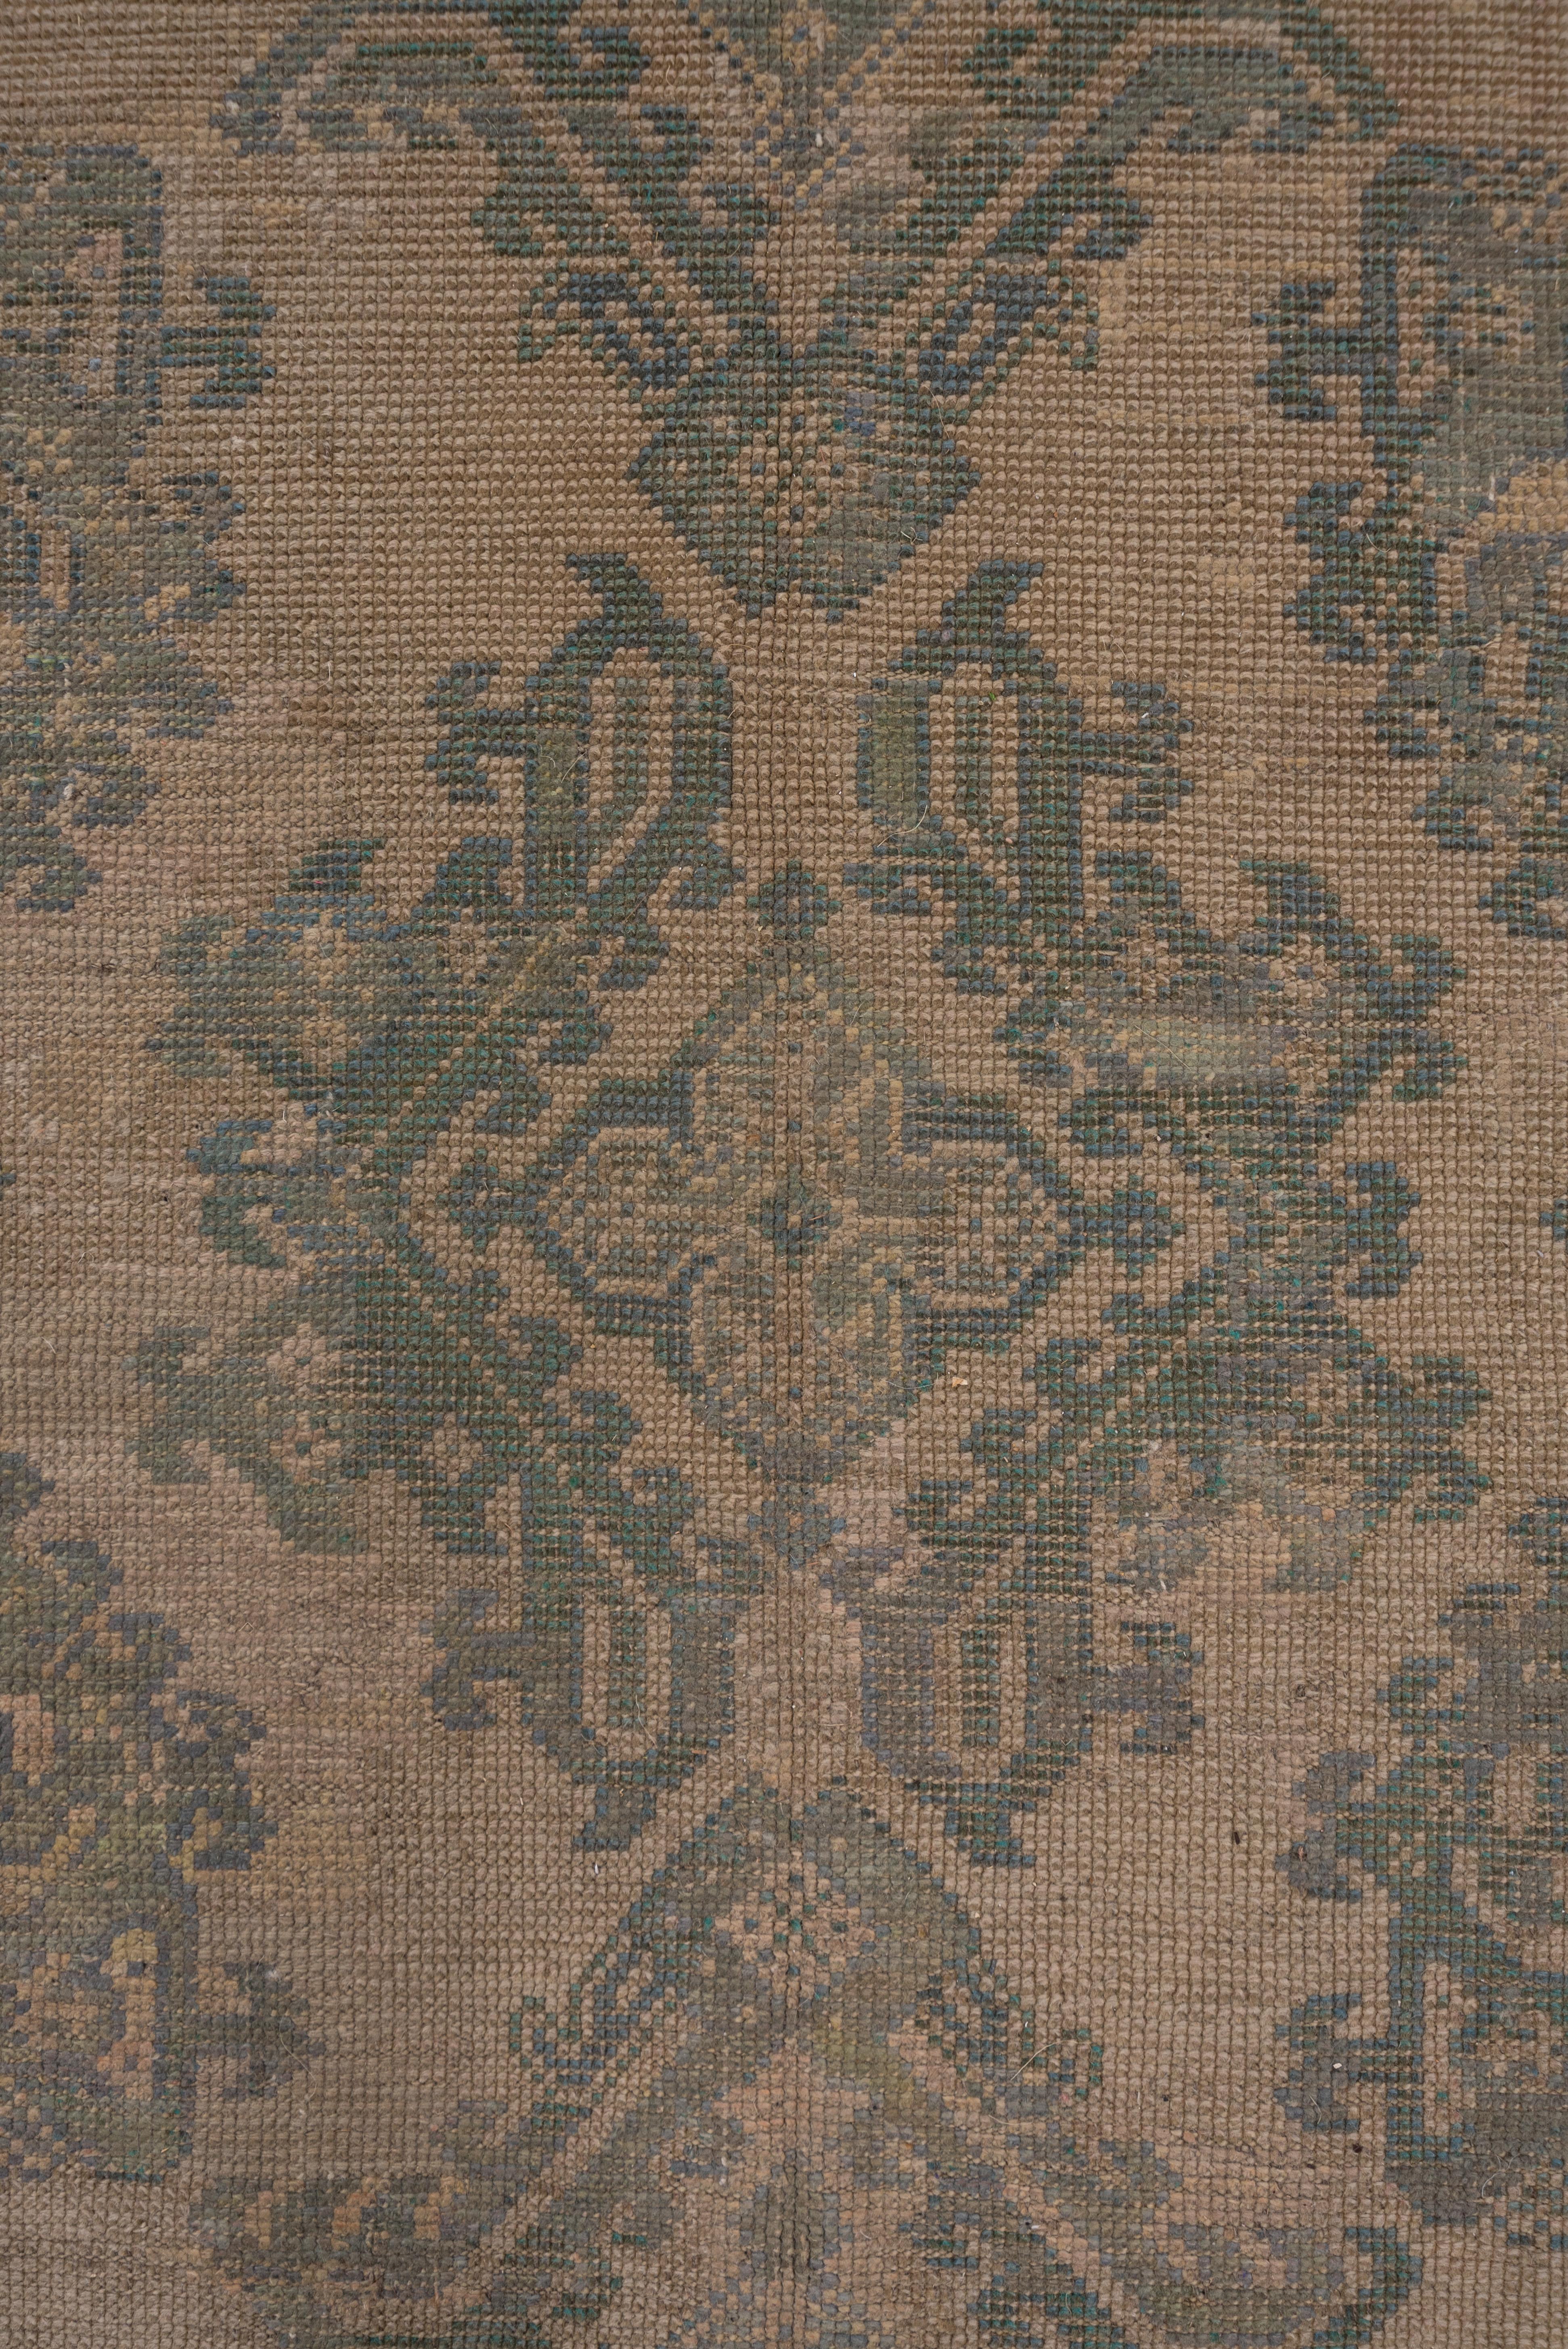 Light Brown and Green Antique Oushak Carpet, circa 1920s In Good Condition For Sale In New York, NY